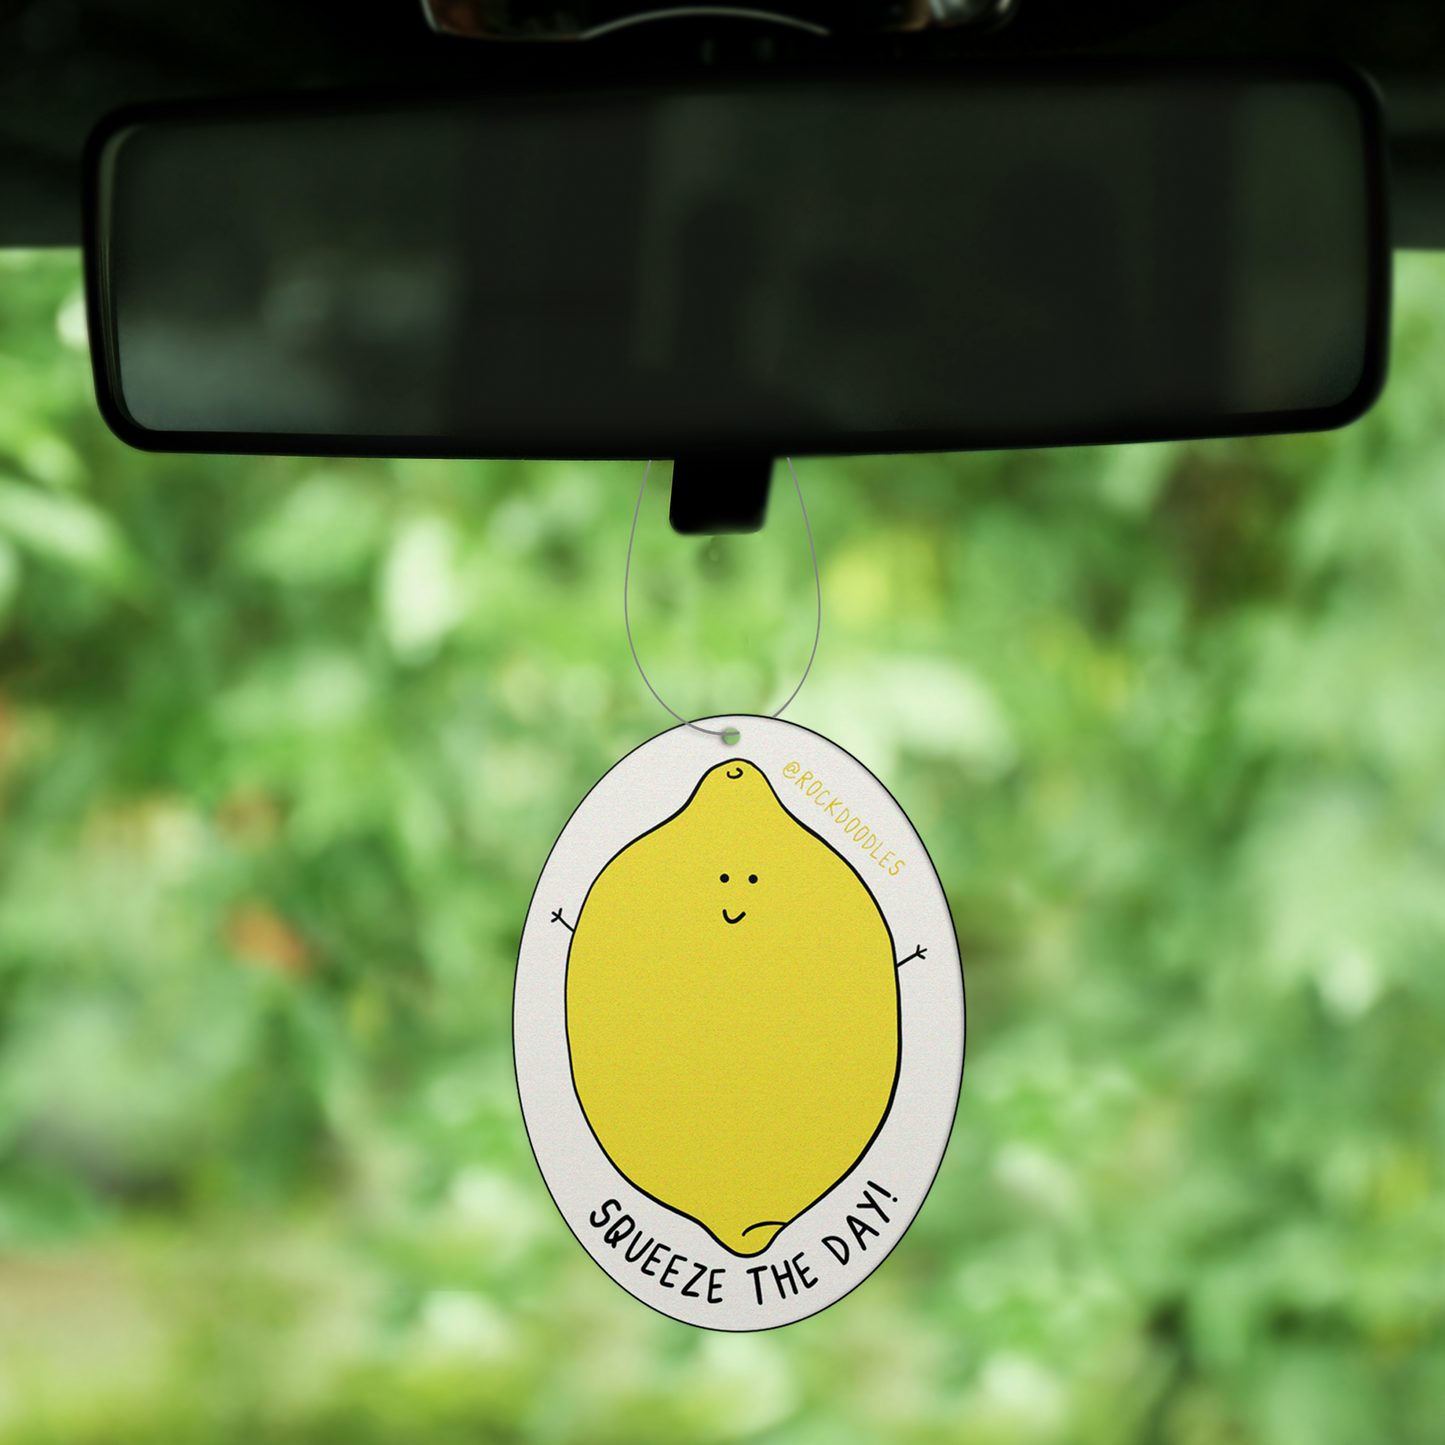 A Squeeze The Day (2-Pack) Punny Air Freshener - Lemon Scent by rockdoodles hangs from a car window.